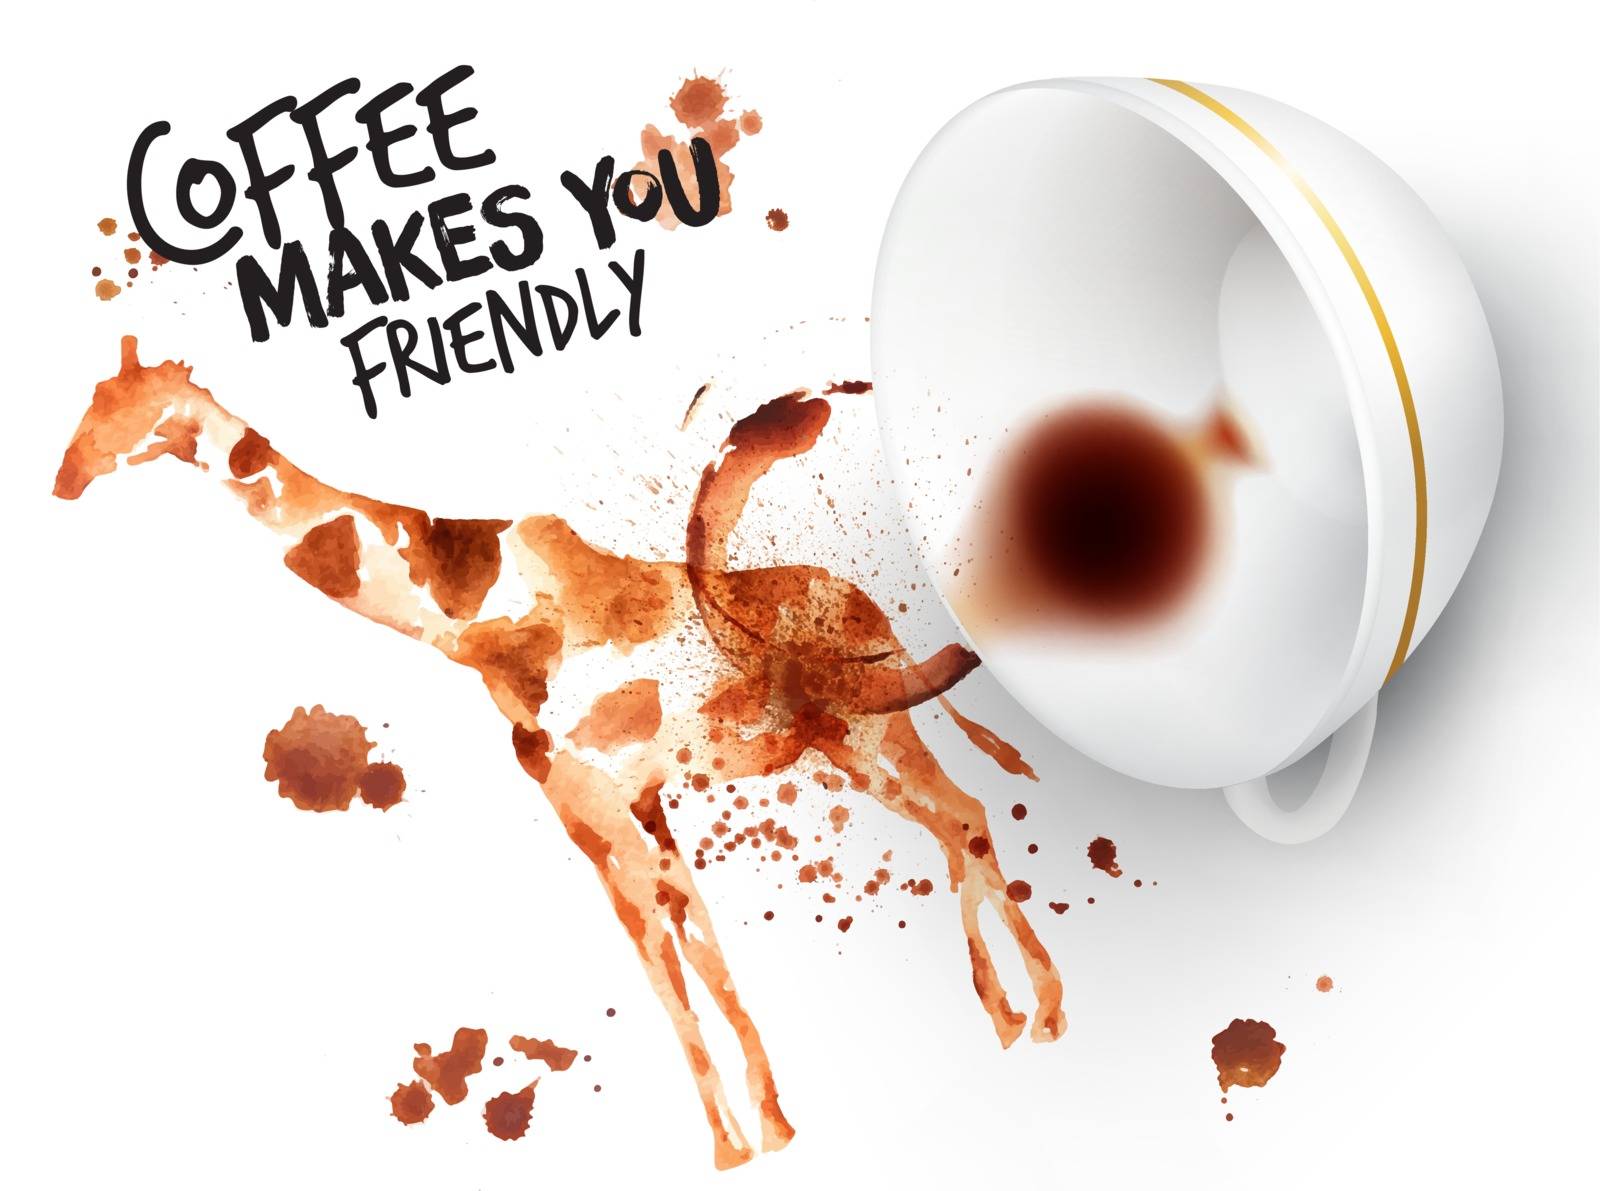 Poster drawn coffee imprint of giraffe and inverted cup with spilled coffee, lettering coffee makes you friendly.